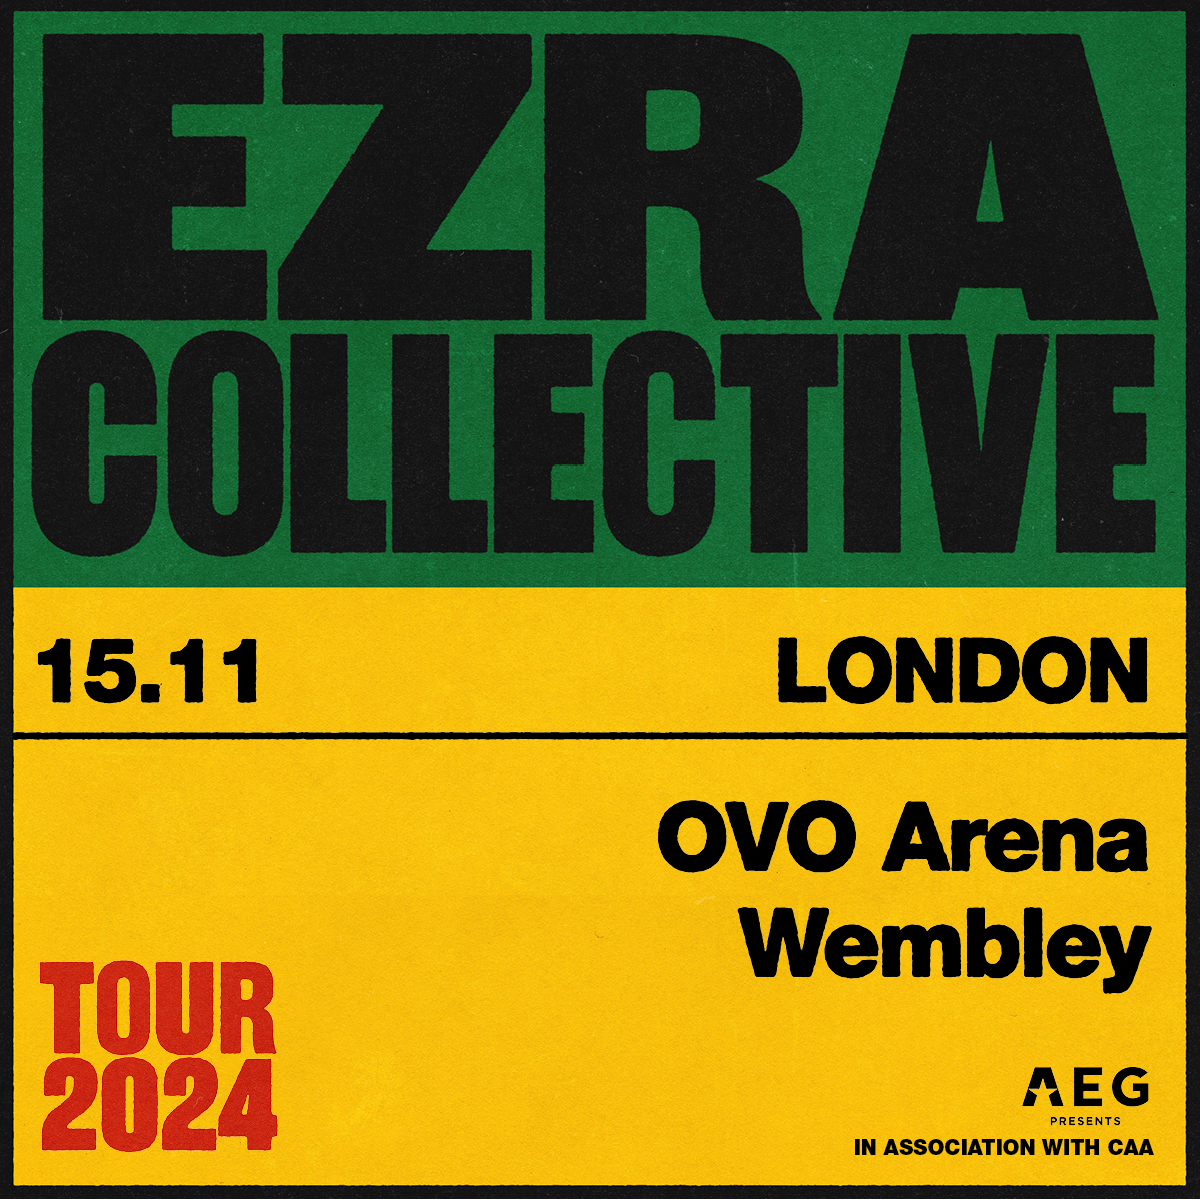 🆕 Jazz quintet @EzraCollective follow up their 2023 Mercury Music Prize win with a tour date at @OVOArena Wembley. #OVOLive presale will be available from 10AM Thursday 2 May. 🎟️ Tickets will be available from 10AM Friday 3 May ⬇️ bit.ly/ezra-collective